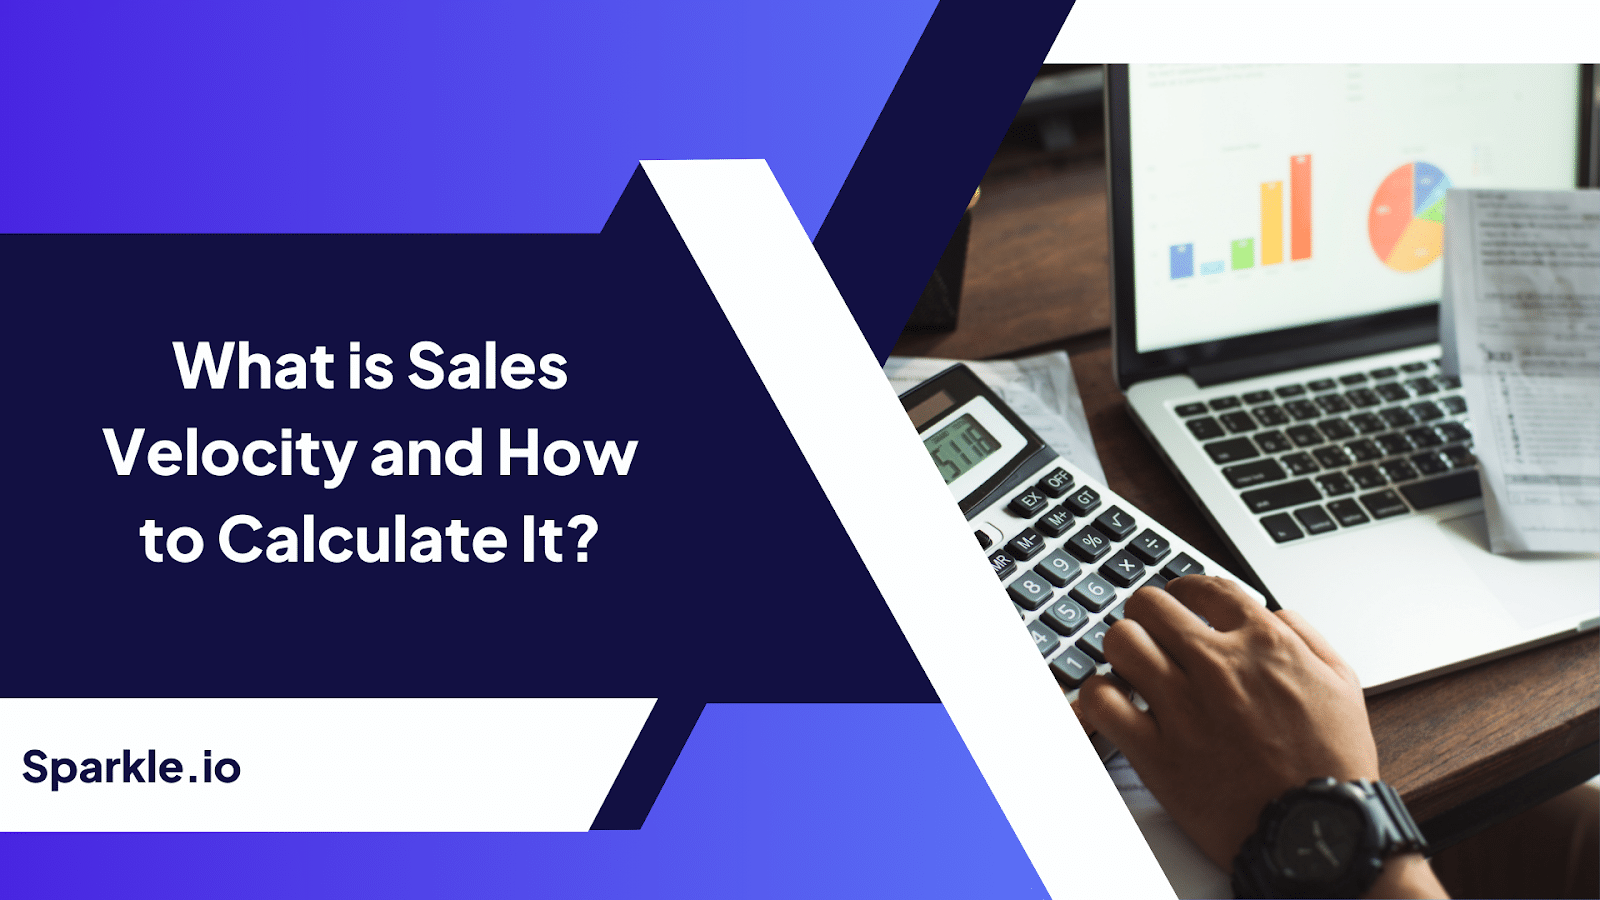 What Is Sales Velocity and How to Calculate It?